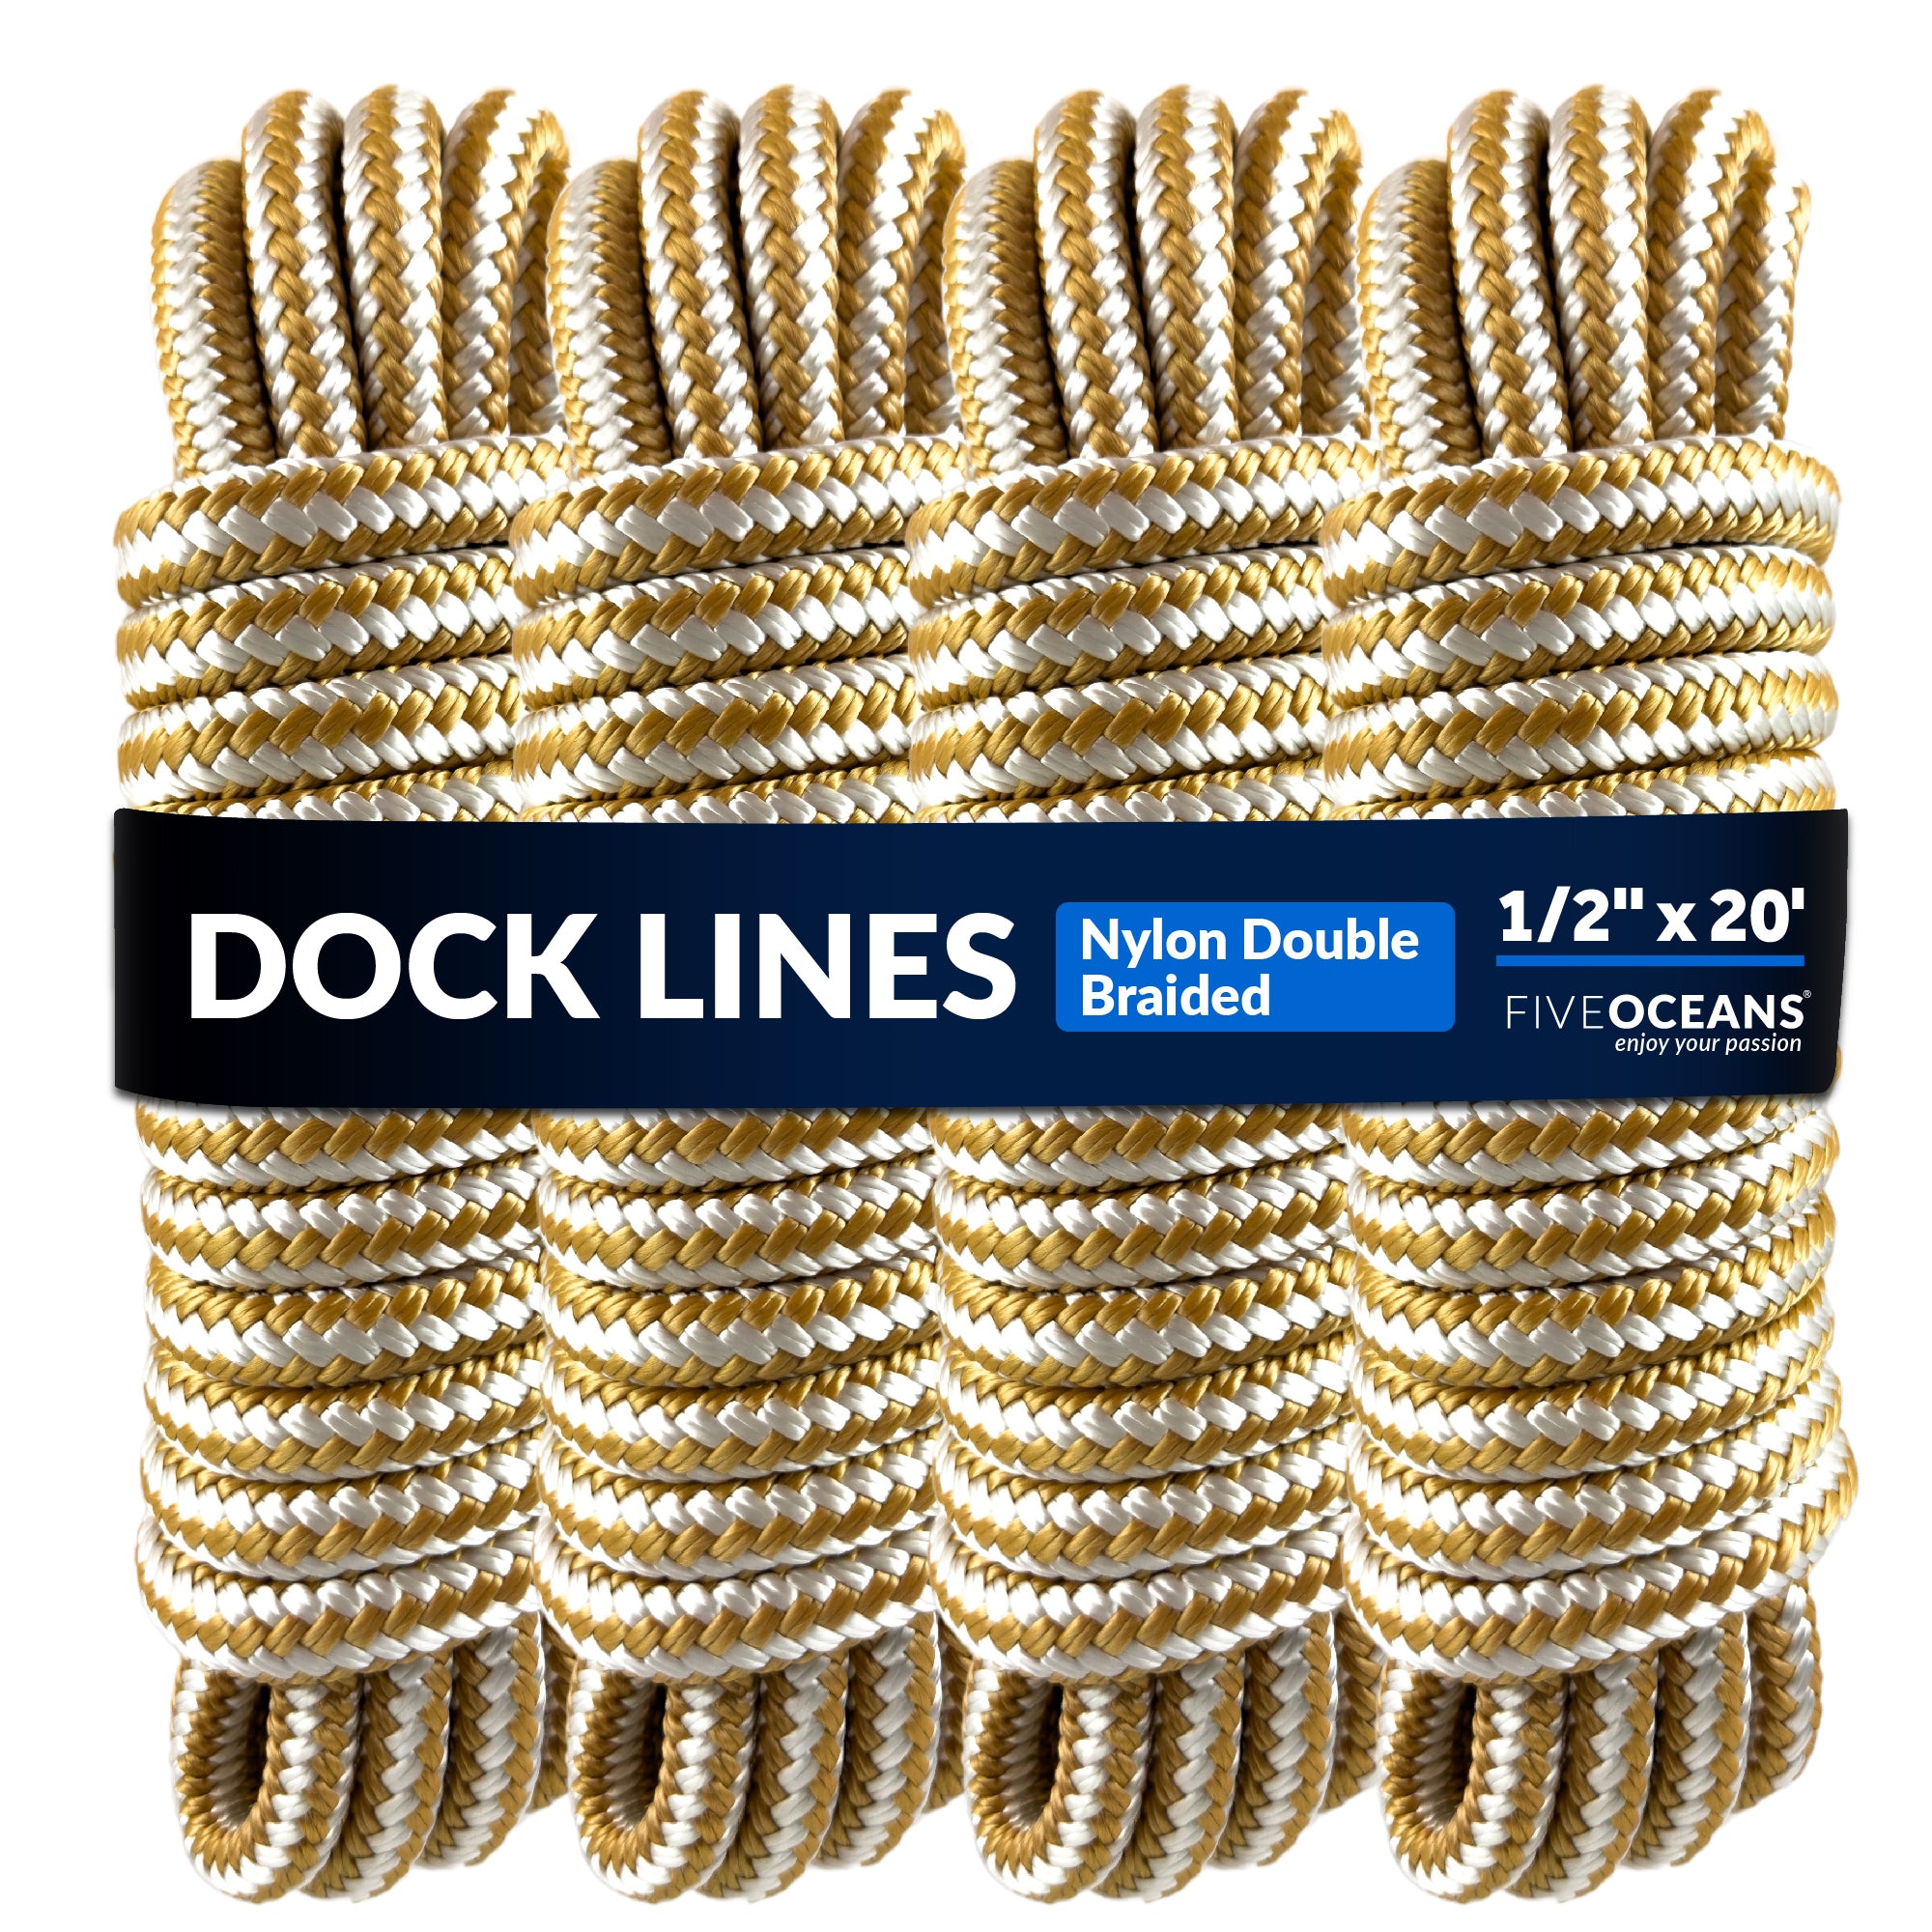 Dock Lines, 1/2" x 20', Gold/White Nylon Double Braided with 12" Eyelet, 4-Pack - FO4274-M4